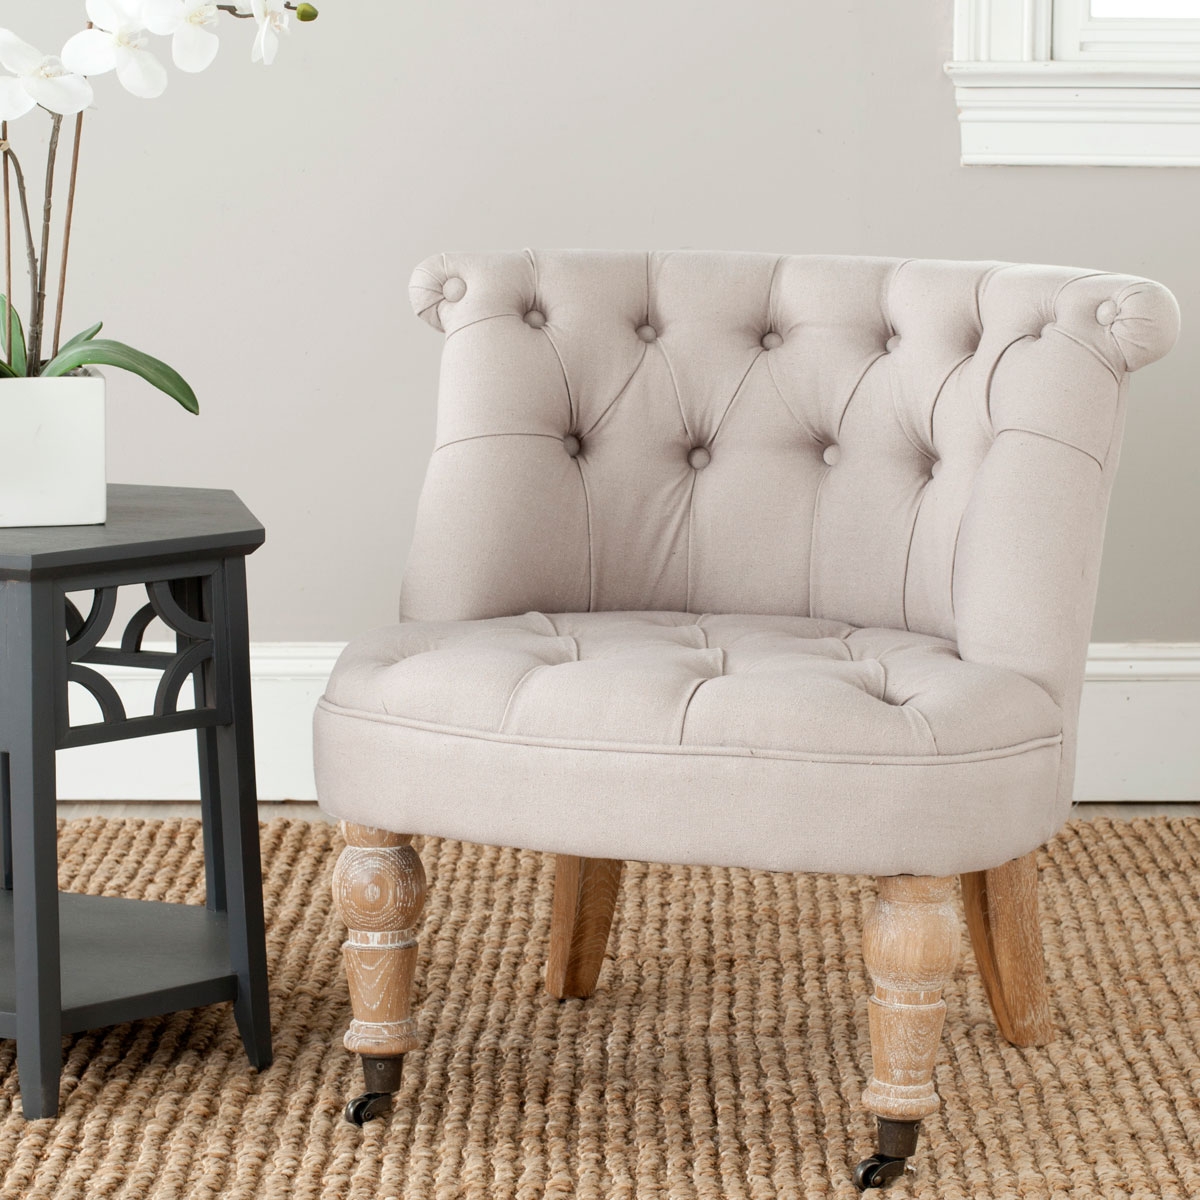 Carlin Tufted Chair - Taupe/White Wash - Arlo Home - Image 0